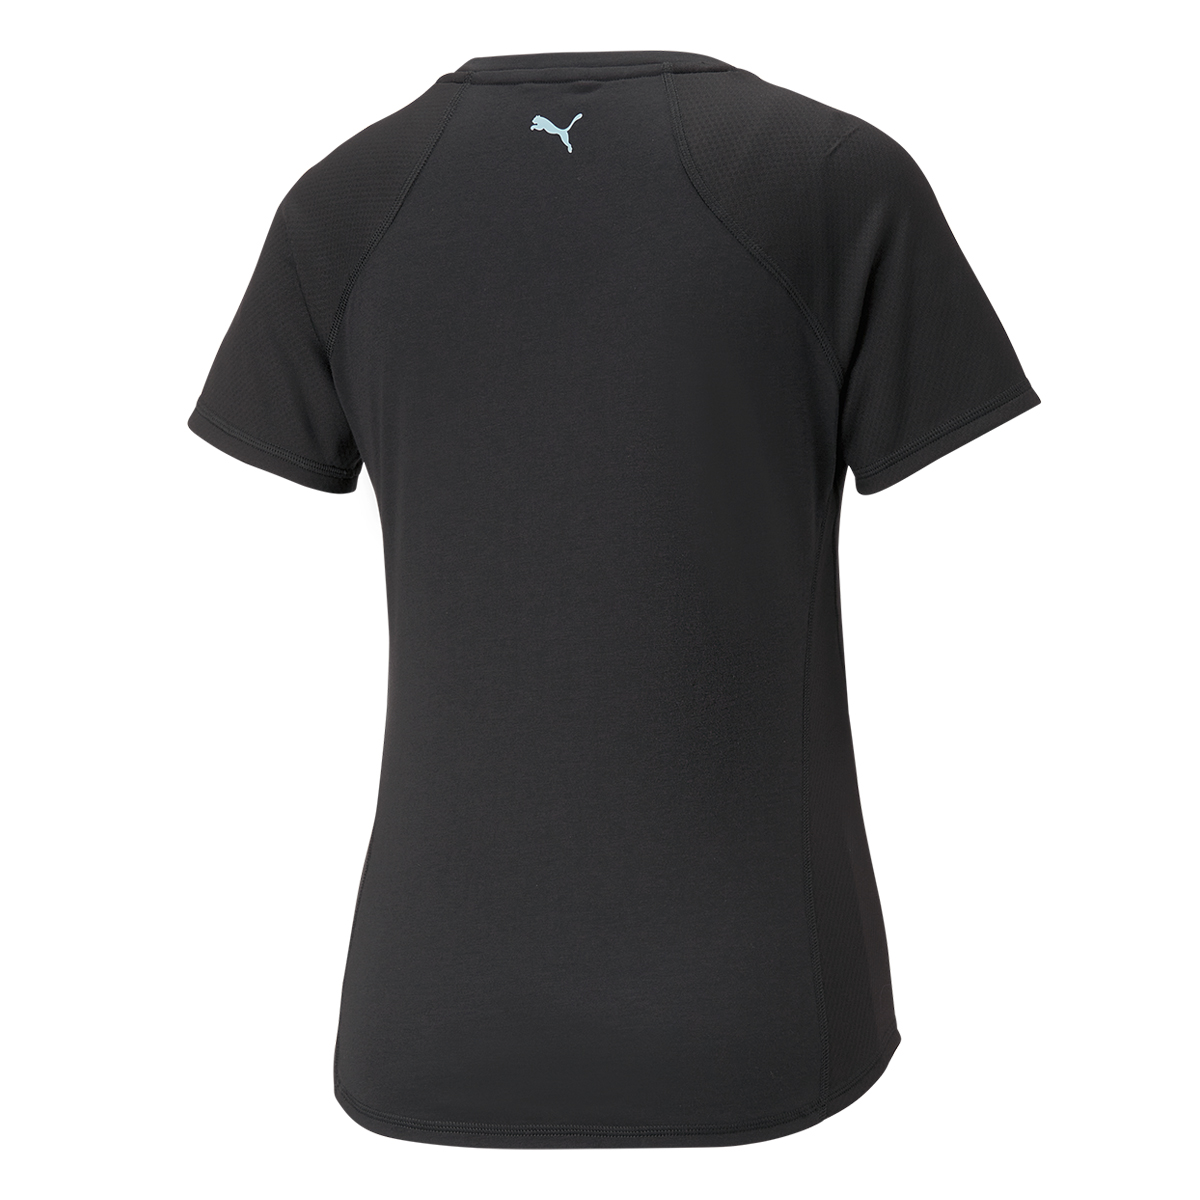 Remera Entrenamiento Puma Fit Logo Mujer,  image number null